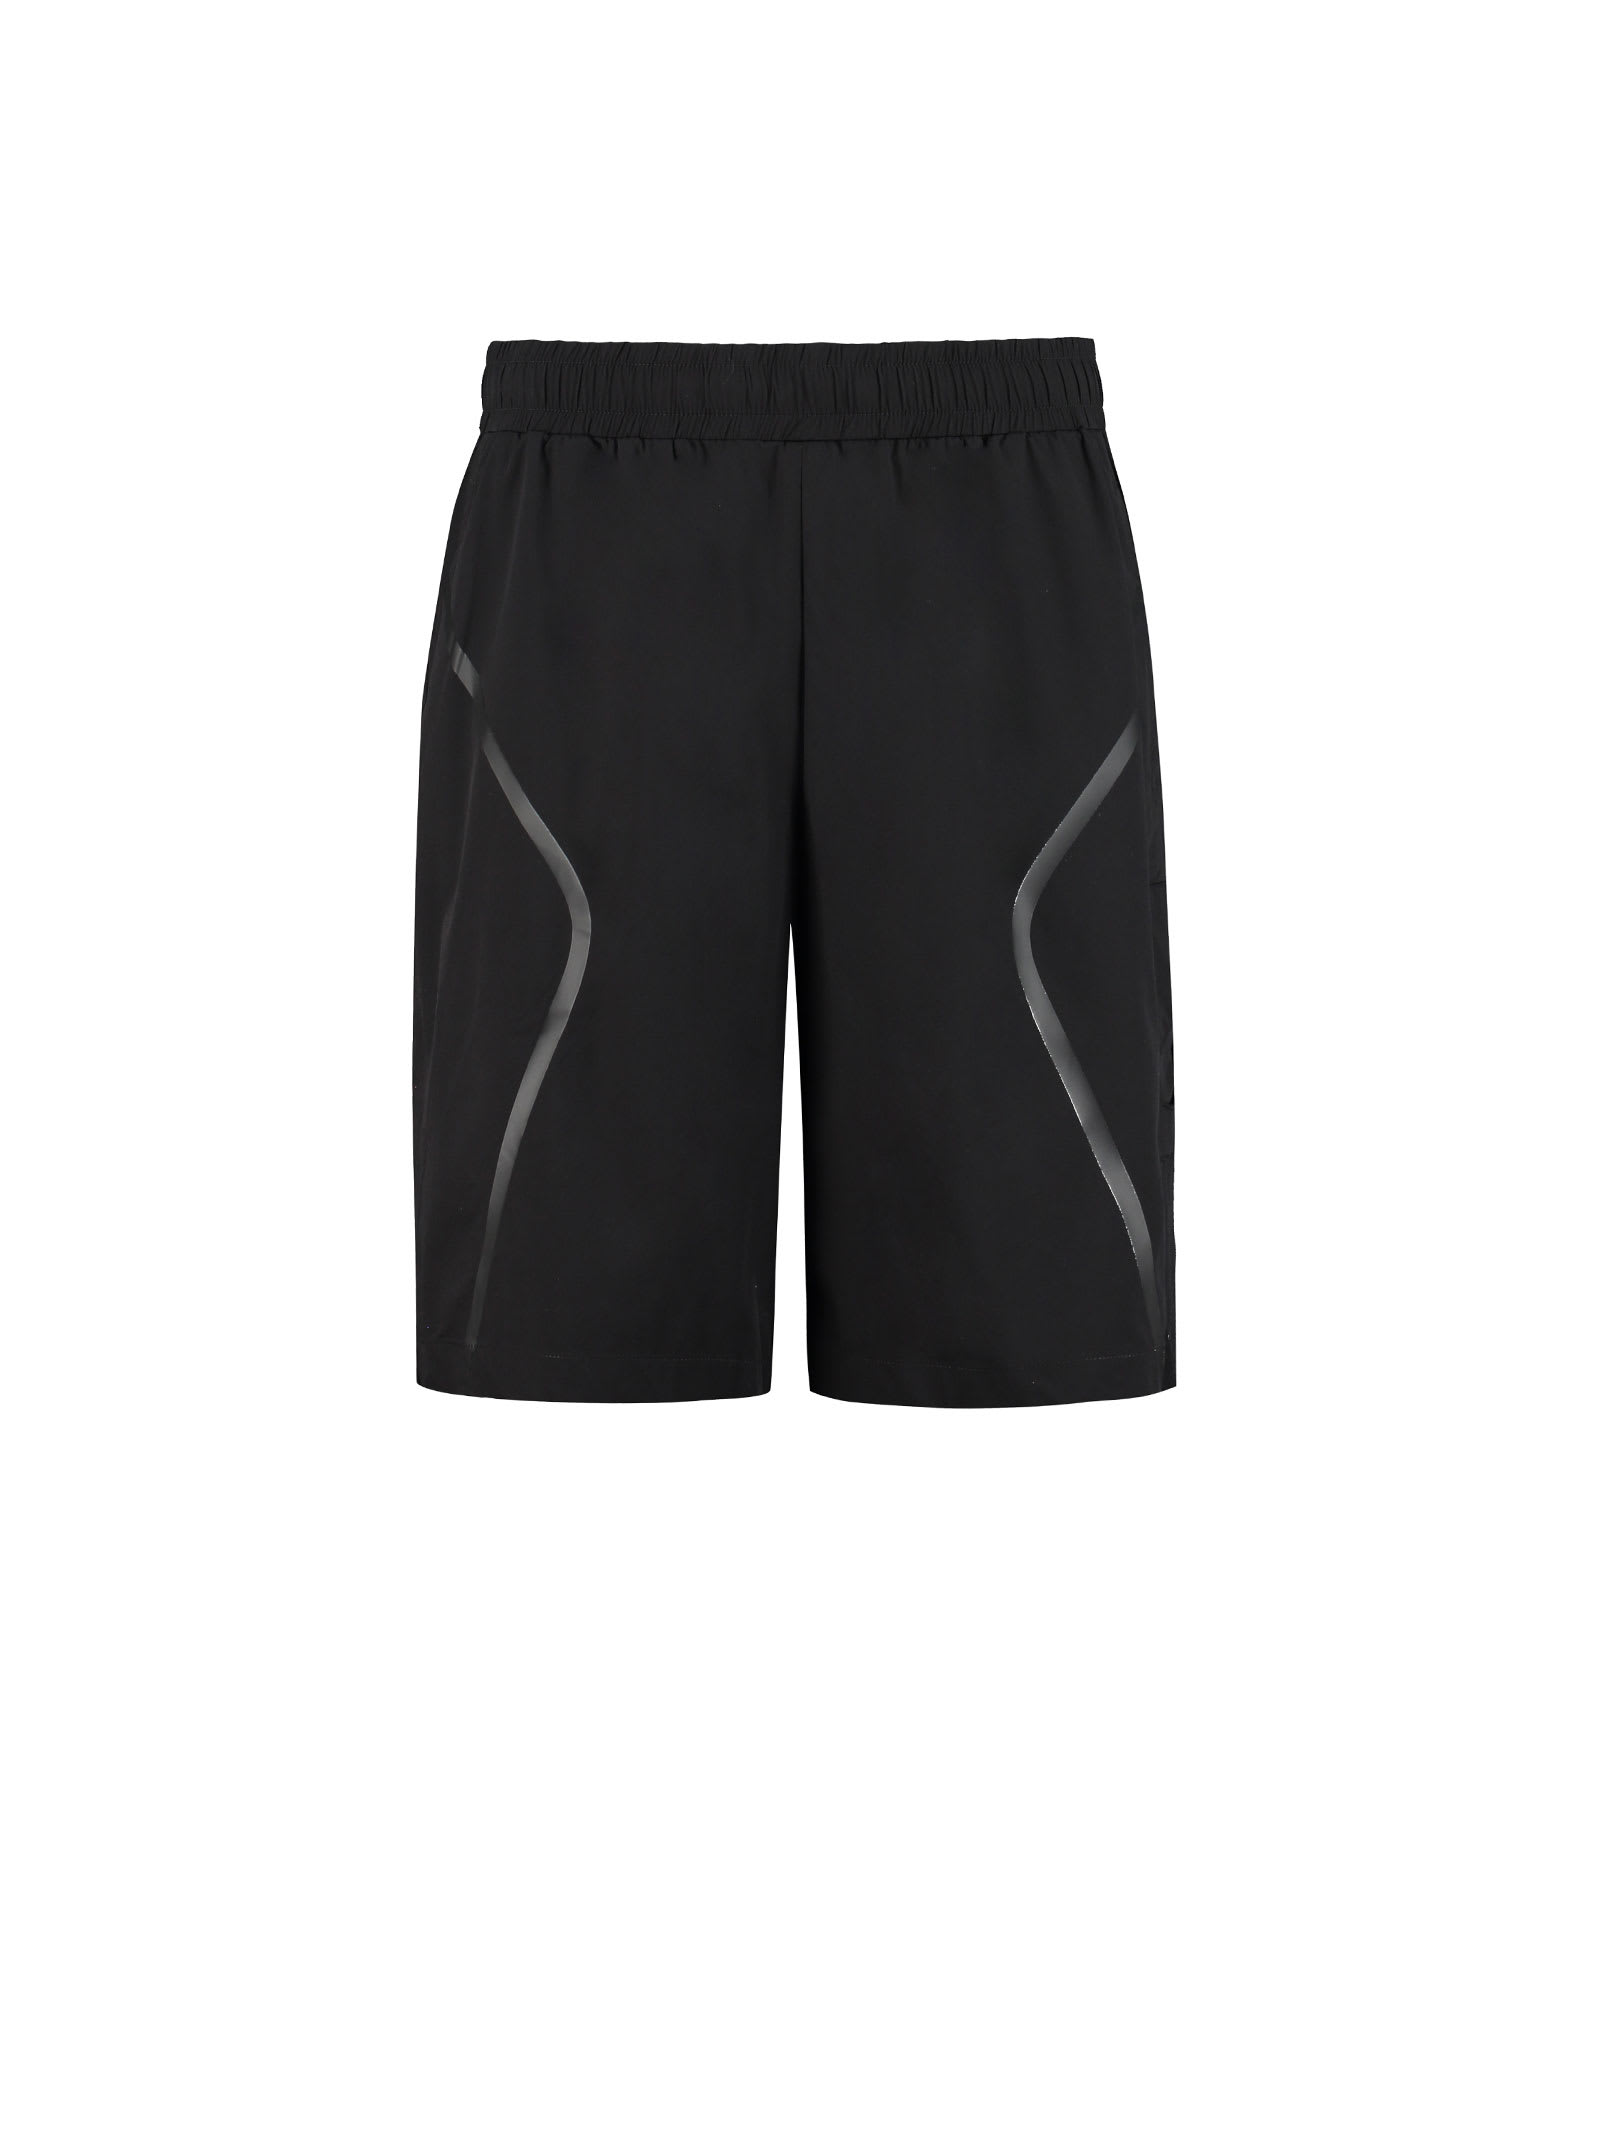 A-COLD-WALL Shorts In Black Nylon